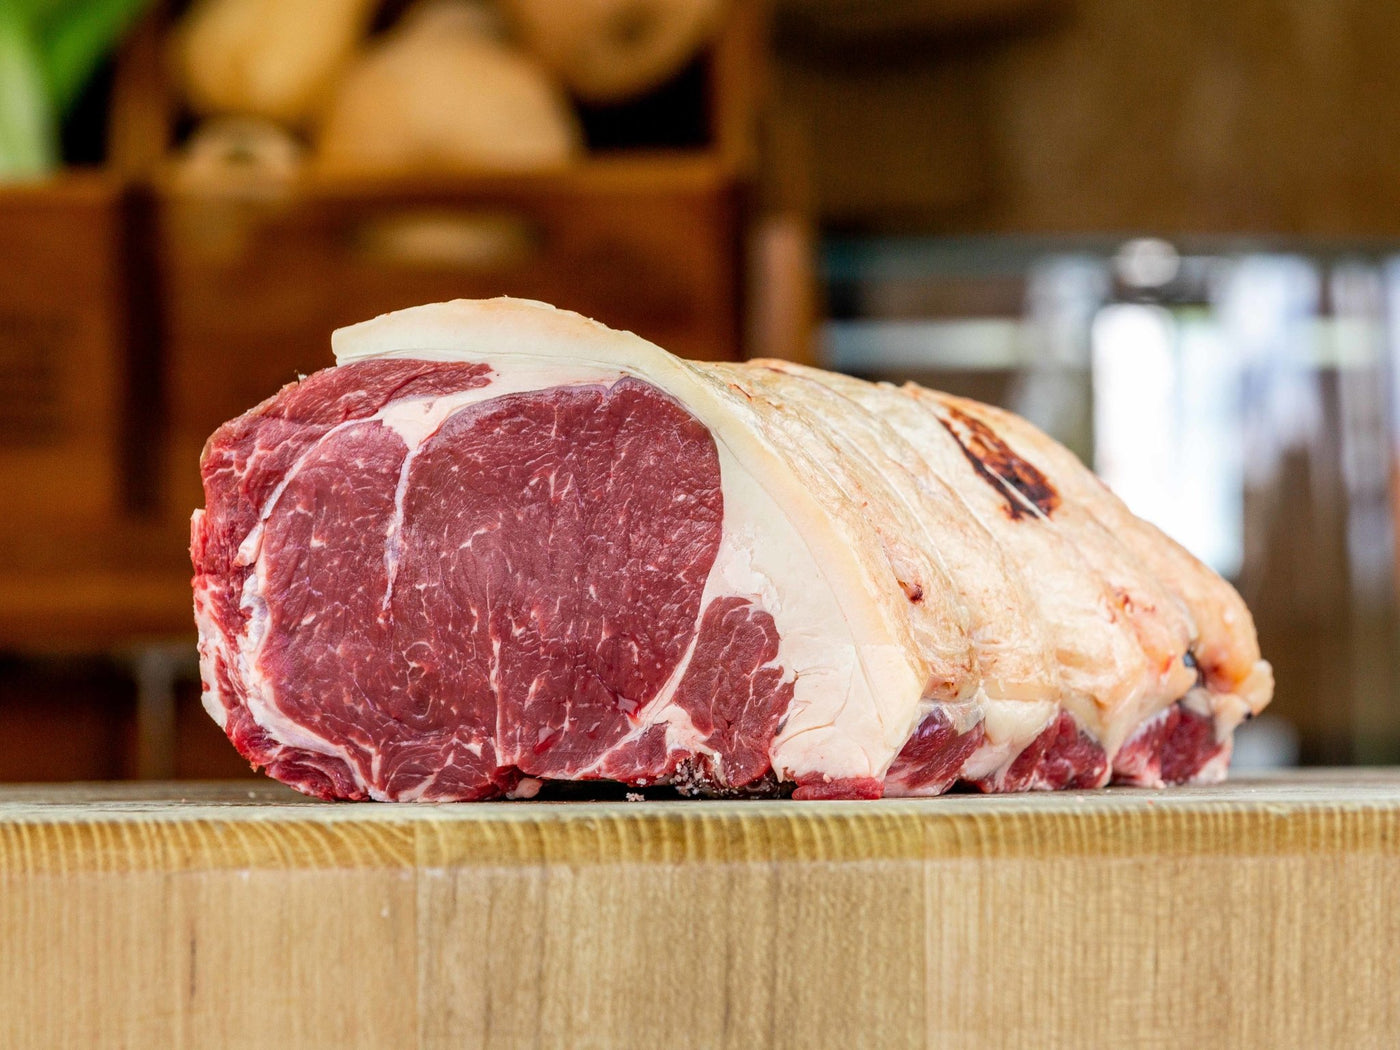 Grass Fed Dry-Aged Rolled Sirloin - Beef - Thomas Joseph Butchery - Ethical Dry-Aged Meat The Best Steak UK Thomas Joseph Butchery